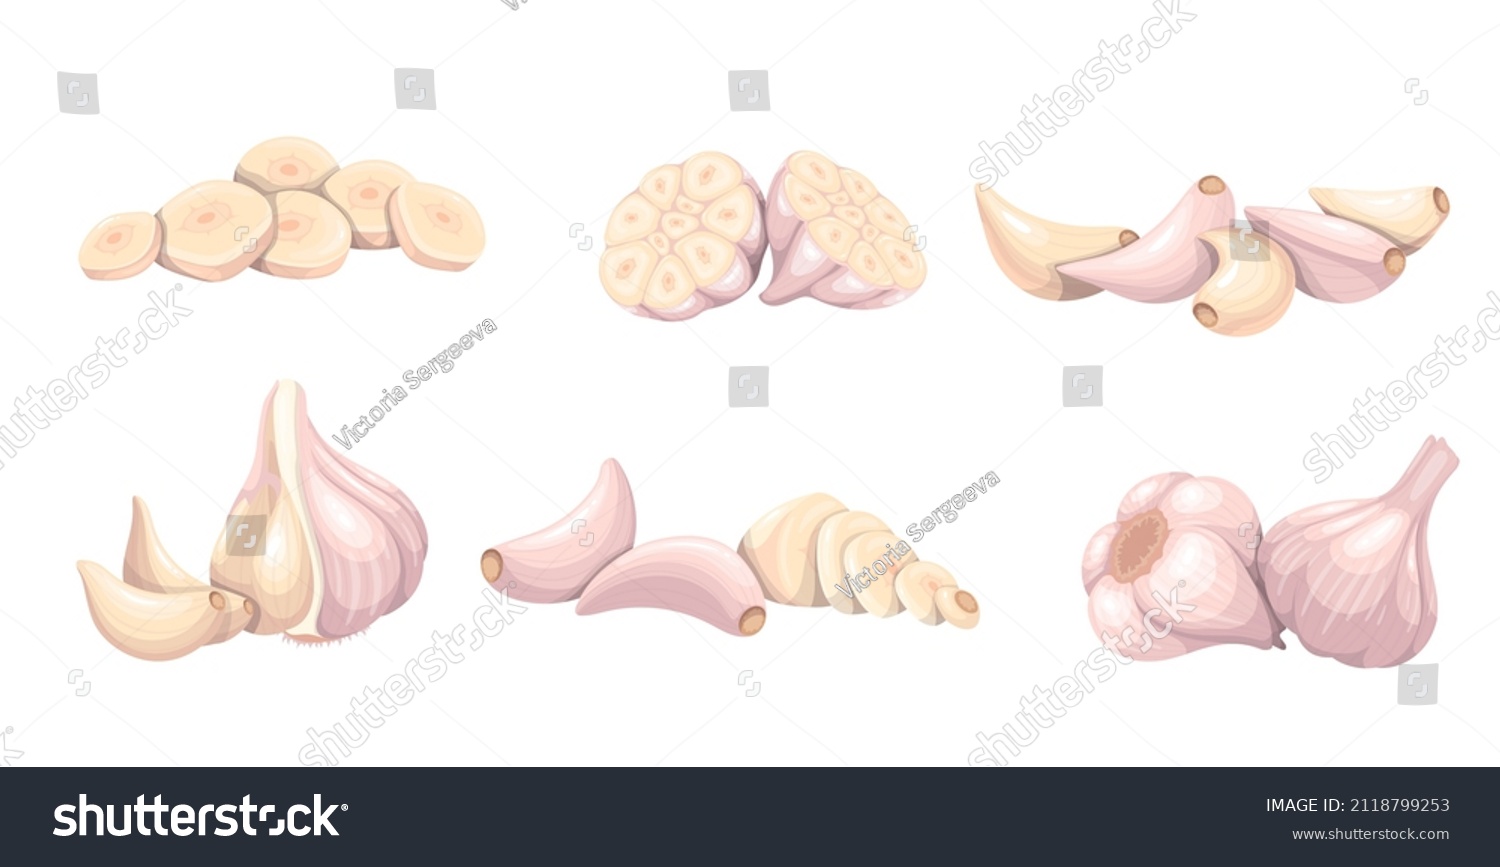 Garlic set, vegetable vector illustration. Whole heads, heaps whole and sliced garlic cloves. Common seasoning worldwide, spice and food flavoring. #2118799253